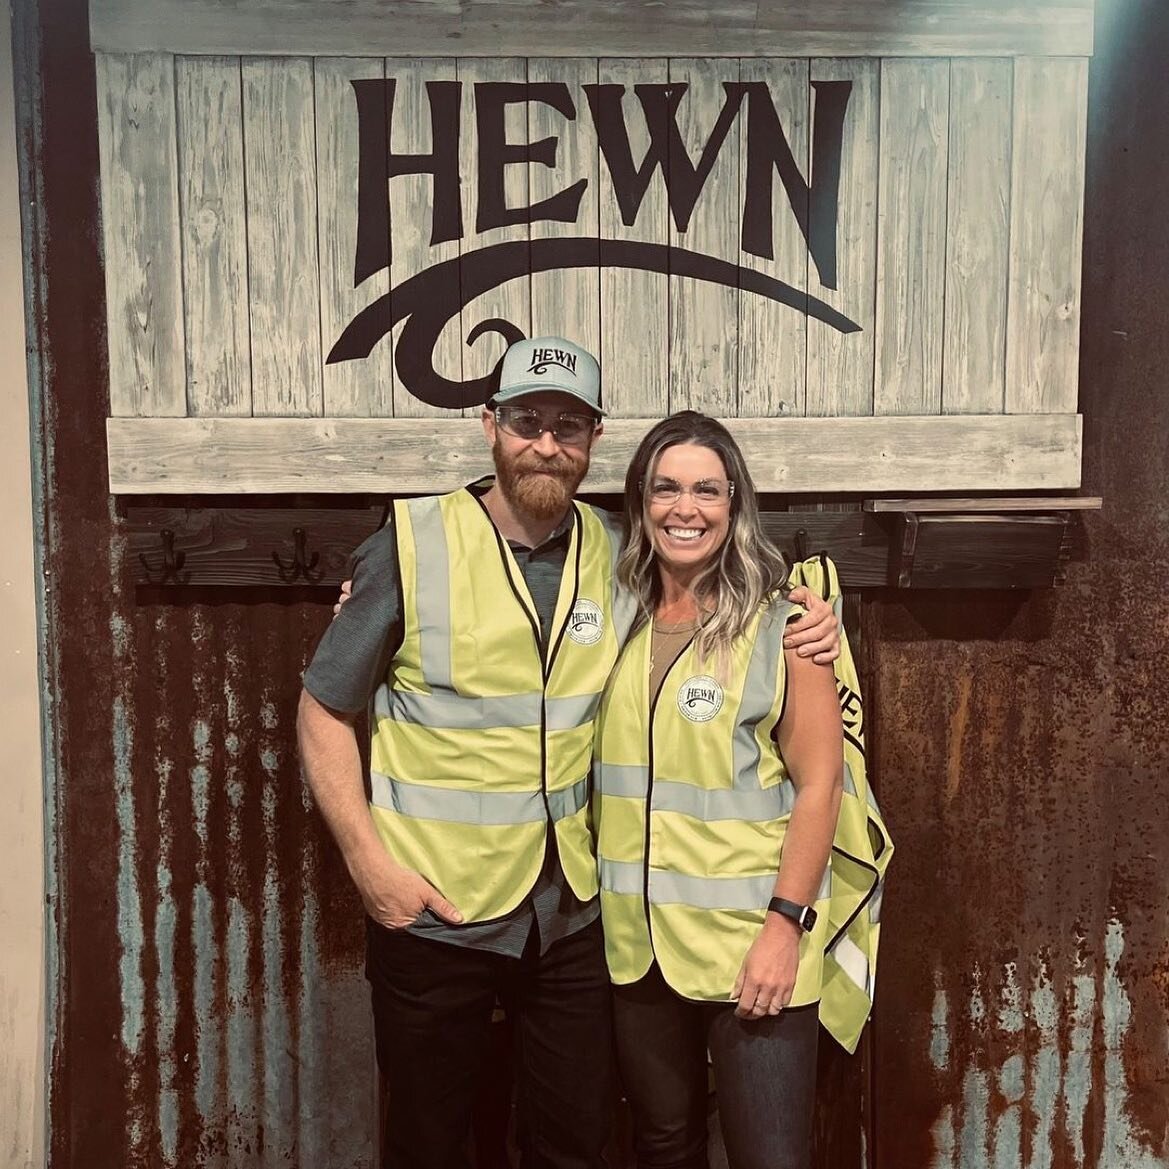 Happy @montanadelnorte at the Hewn hive where all the magic happens ✨ @hewnelements 

Repost from @hewnelements
&bull;
Sales associate, Connor's first visit to the production shop from @sambrowncompany. Ruth with @hewnelements giving him the tour! Sa